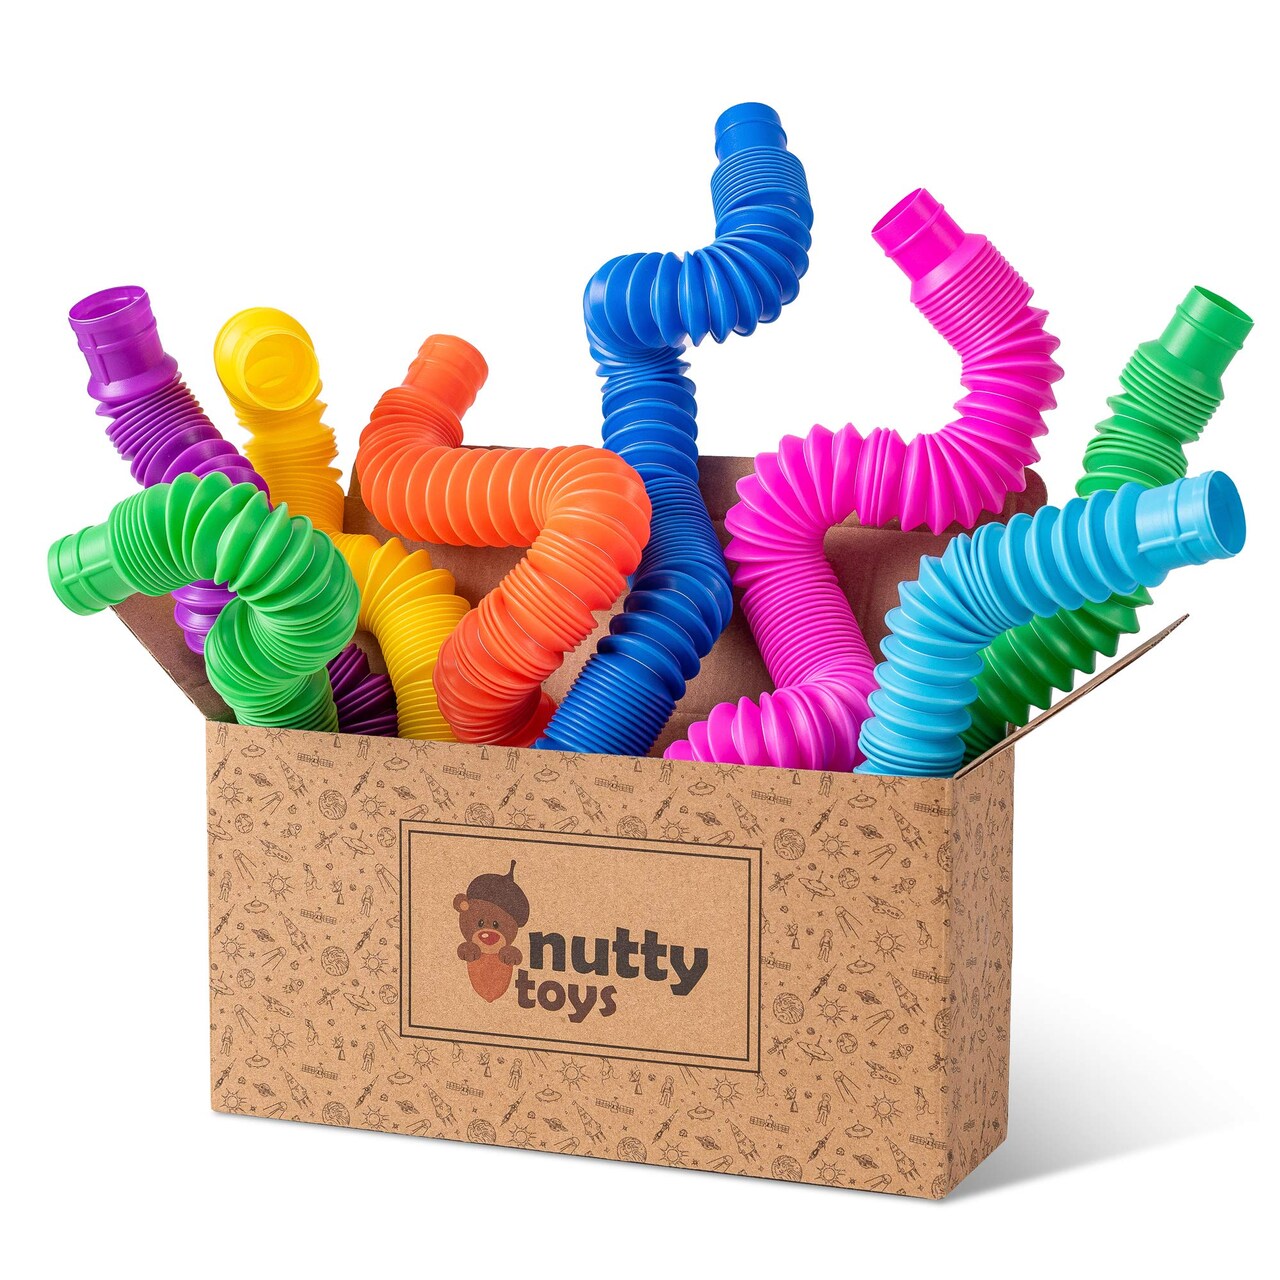 Nutty Toys 8pk Pop Tubes Sensory Toys (Large) Fine Motor Skills Learning Toddler Toy for Kids Top ADHD Autism Fidget 2023 Best Toddler Travel Toy Gifts Idea Unique Christmas Boy Girl Stocking Stuffers